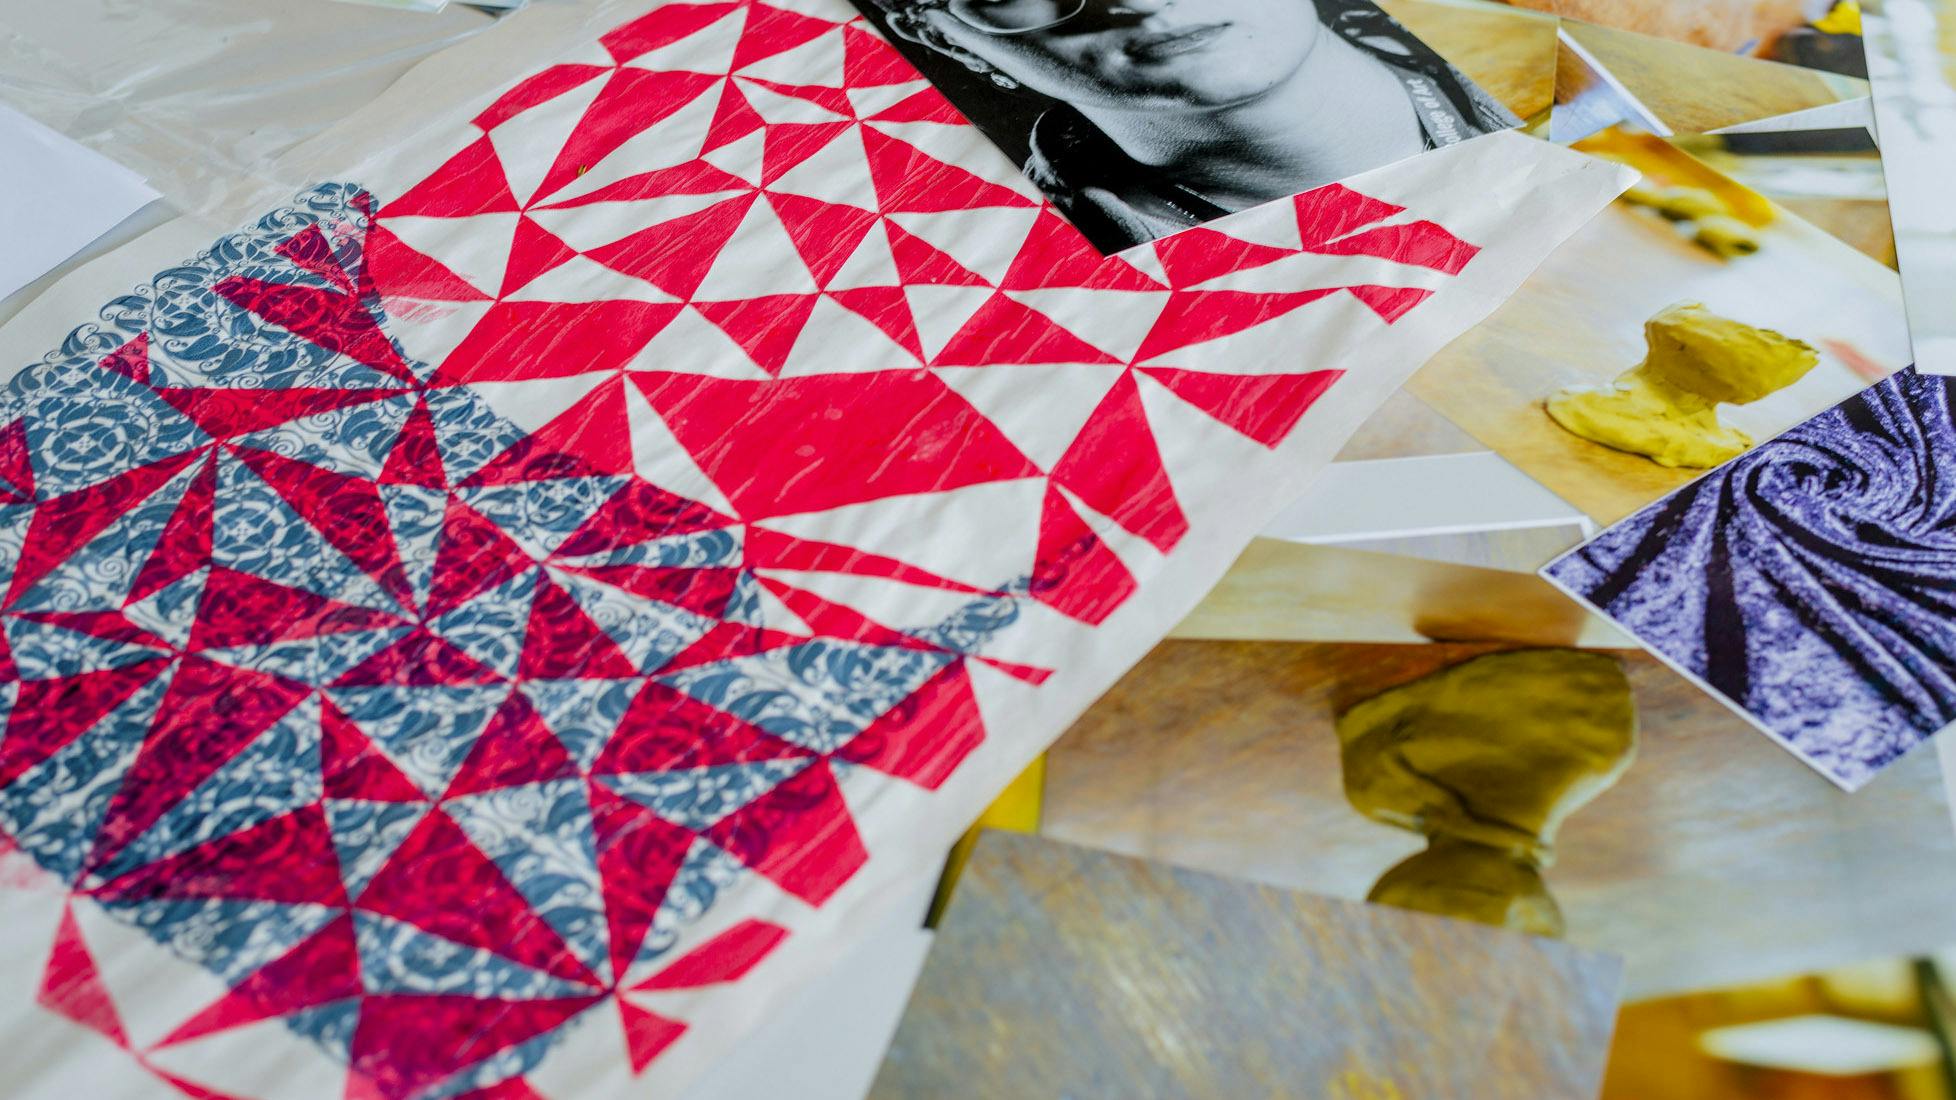 Brightly coloured bold graphic prints and photographs scattered across a table